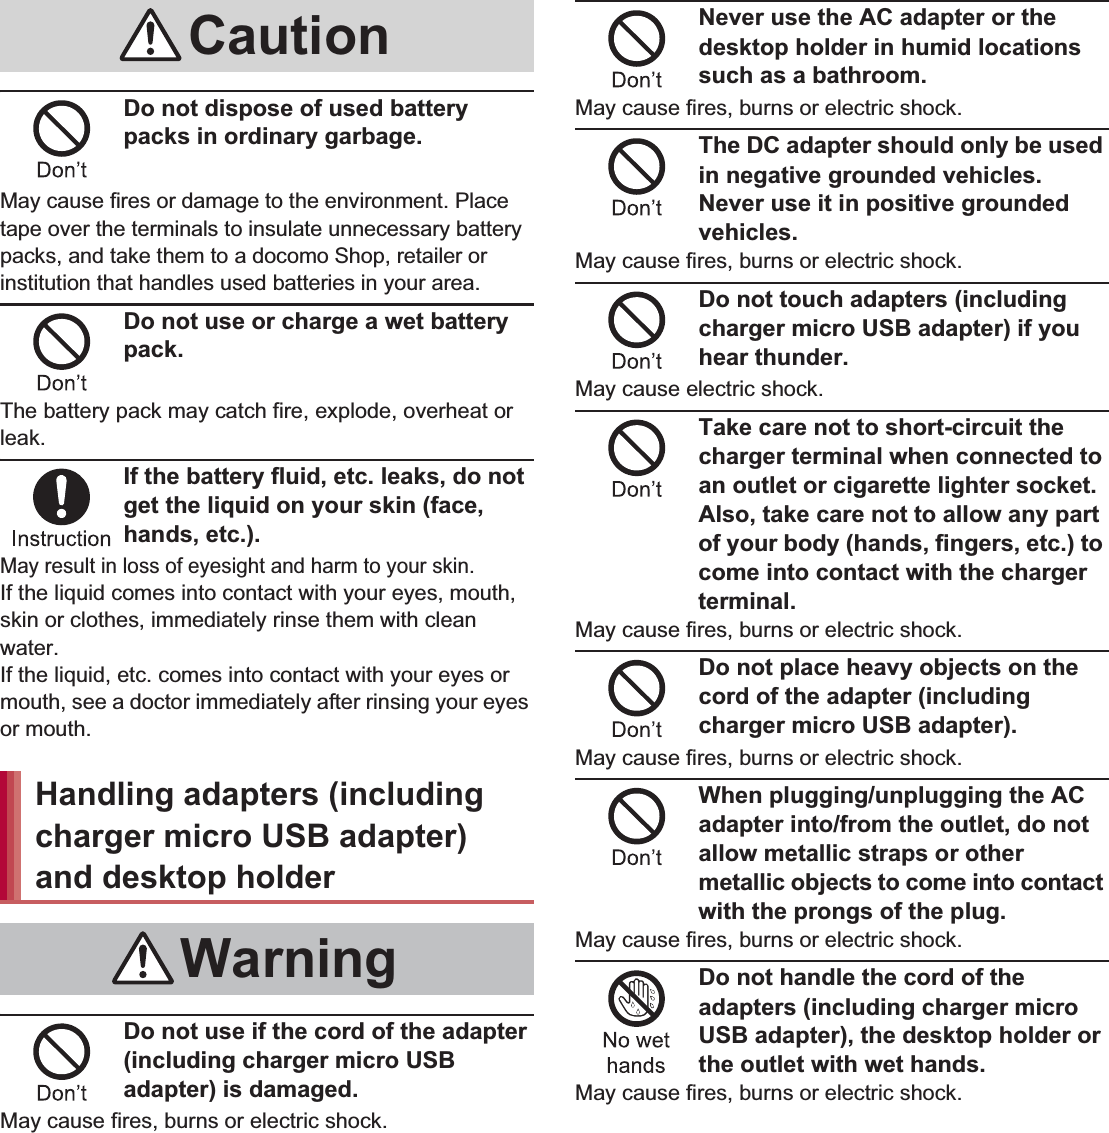 12 Contents/PrecautionsDo not dispose of used battery packs in ordinary garbage.May cause fires or damage to the environment. Place tape over the terminals to insulate unnecessary battery packs, and take them to a docomo Shop, retailer or institution that handles used batteries in your area.Do not use or charge a wet battery pack.The battery pack may catch fire, explode, overheat or leak.If the battery fluid, etc. leaks, do not get the liquid on your skin (face, hands, etc.).May result in loss of eyesight and harm to your skin.If the liquid comes into contact with your eyes, mouth, skin or clothes, immediately rinse them with clean water.If the liquid, etc. comes into contact with your eyes or mouth, see a doctor immediately after rinsing your eyes or mouth.Do not use if the cord of the adapter (including charger micro USB adapter) is damaged.May cause fires, burns or electric shock.Never use the AC adapter or the desktop holder in humid locations such as a bathroom.May cause fires, burns or electric shock.The DC adapter should only be used in negative grounded vehicles. Never use it in positive grounded vehicles.May cause fires, burns or electric shock.Do not touch adapters (including charger micro USB adapter) if you hear thunder.May cause electric shock.Take care not to short-circuit the charger terminal when connected to an outlet or cigarette lighter socket. Also, take care not to allow any part of your body (hands, fingers, etc.) to come into contact with the charger terminal.May cause fires, burns or electric shock.Do not place heavy objects on the cord of the adapter (including charger micro USB adapter).May cause fires, burns or electric shock.When plugging/unplugging the AC adapter into/from the outlet, do not allow metallic straps or other metallic objects to come into contact with the prongs of the plug.May cause fires, burns or electric shock.Do not handle the cord of the adapters (including charger micro USB adapter), the desktop holder or the outlet with wet hands.May cause fires, burns or electric shock.CautionHandling adapters (including charger micro USB adapter) and desktop holderWarning